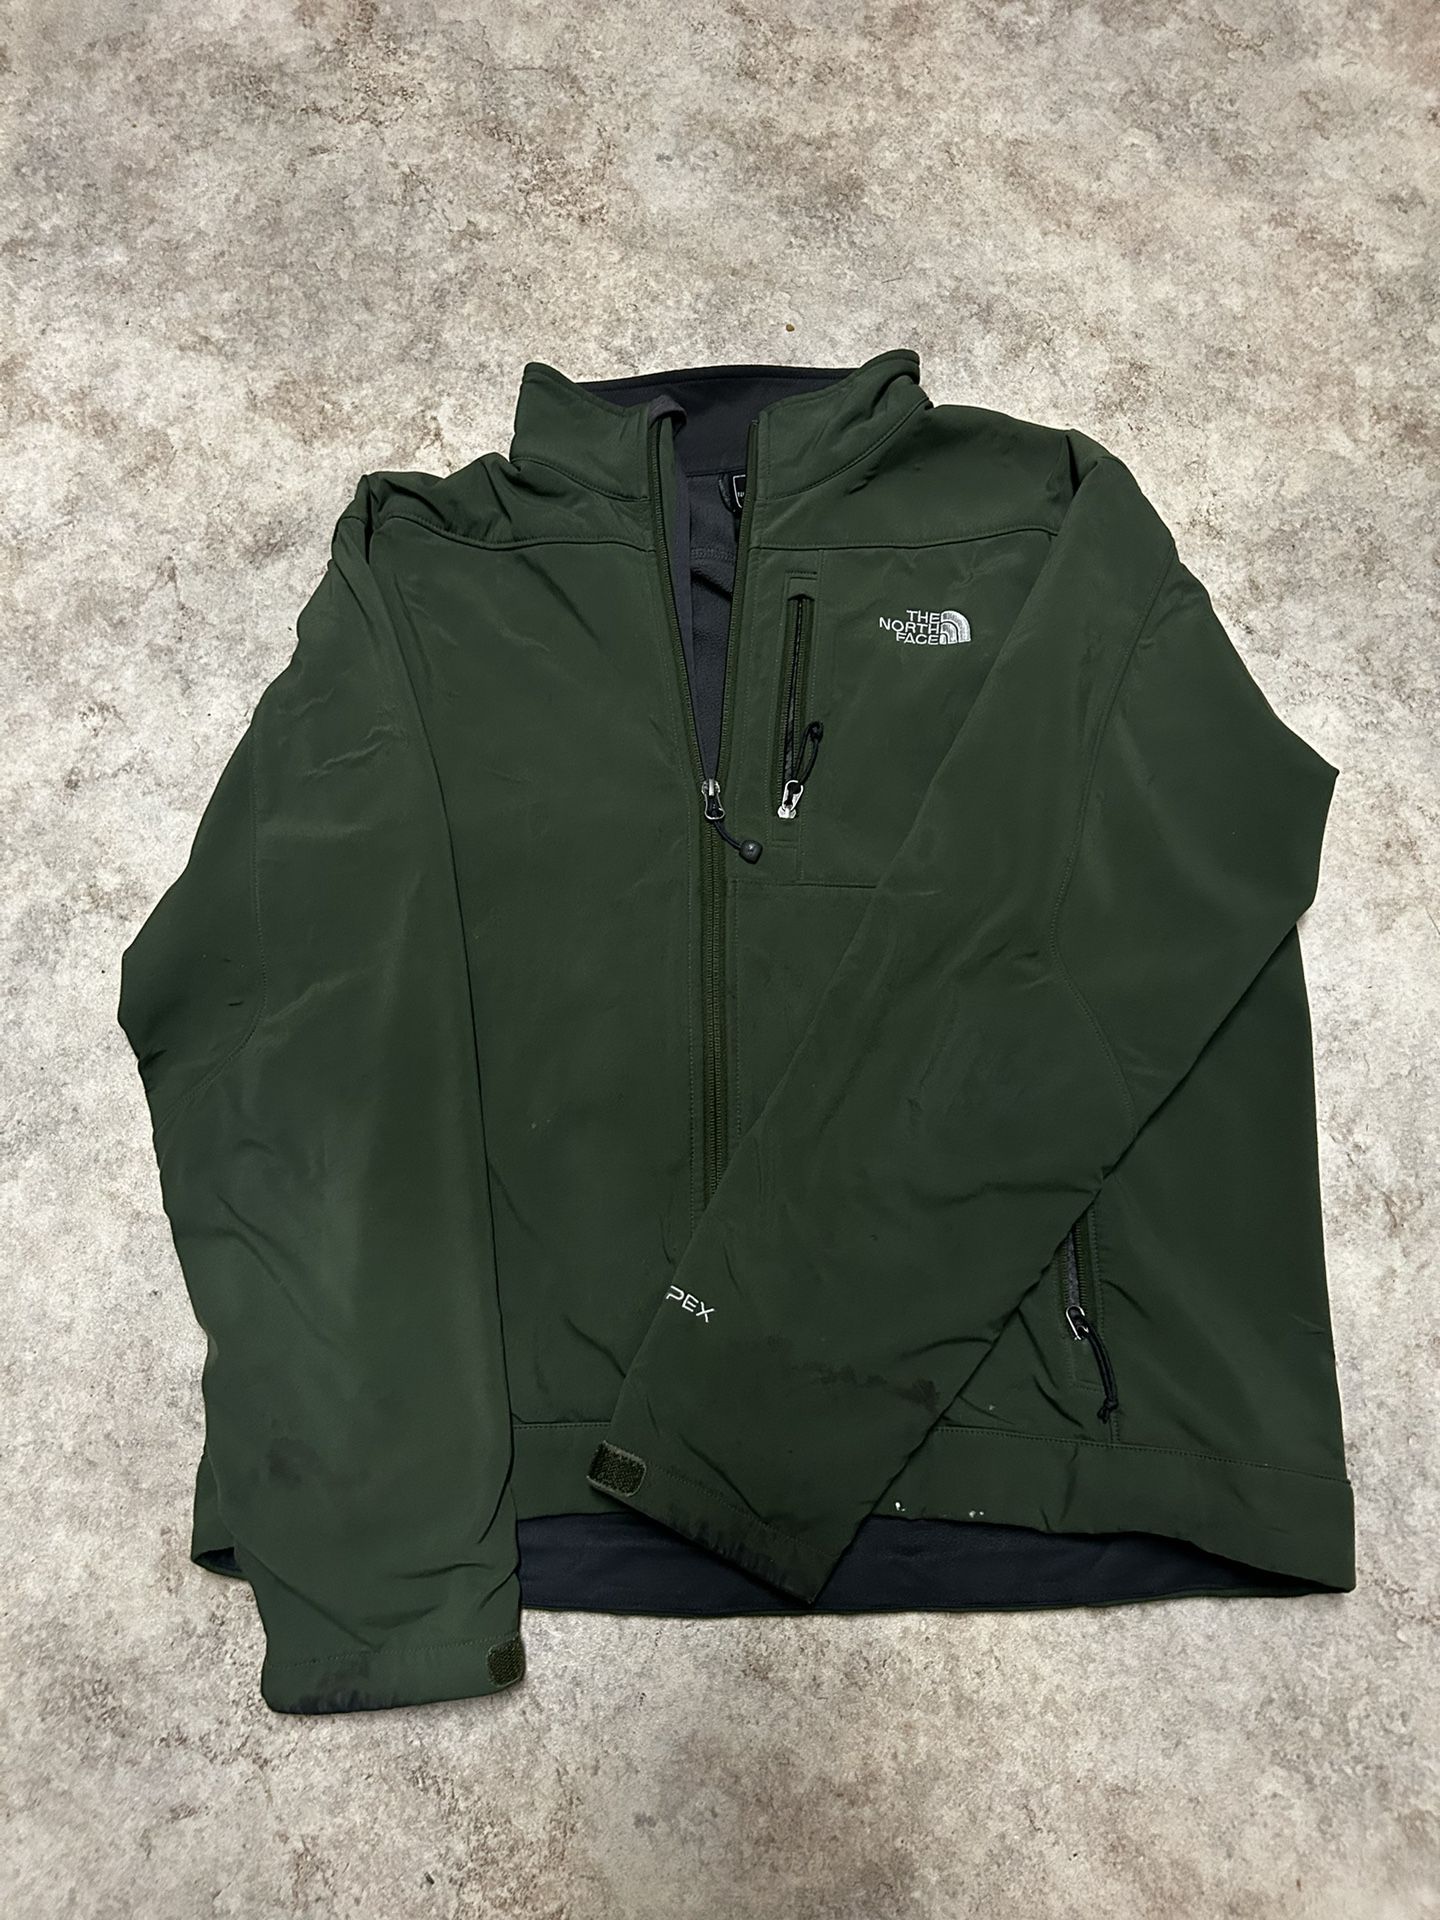 The North Face Apex Fleece lined jacket